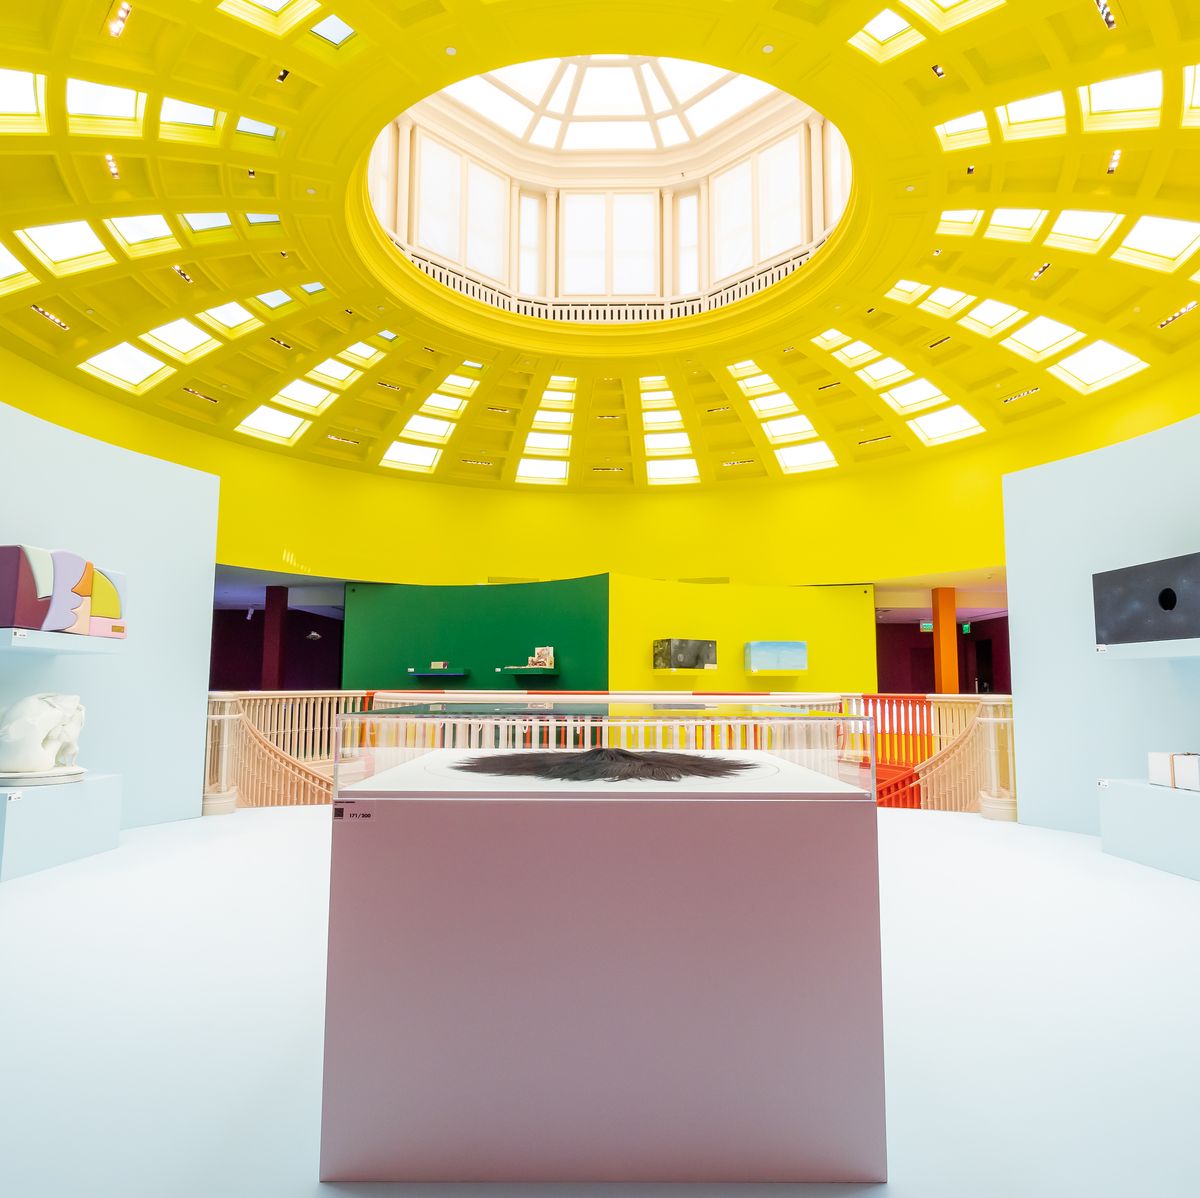 Louis Vuitton 200 Trunks, 200 Visionaries: The Exhibition in NYC